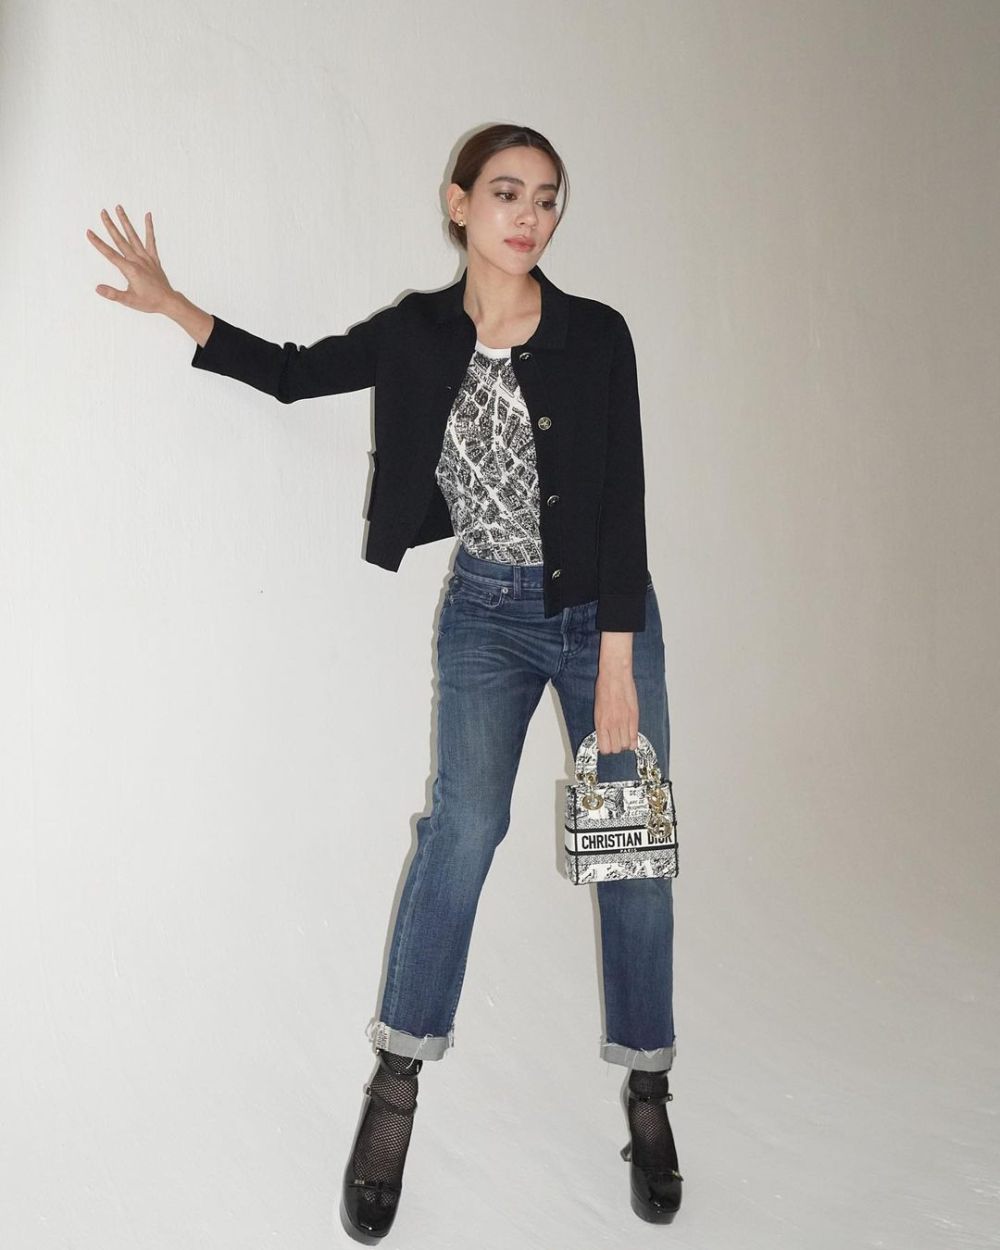 11 Inspirasi Outfit Smart Casual ala Kimmy Kimberley, Chic and Comfy!